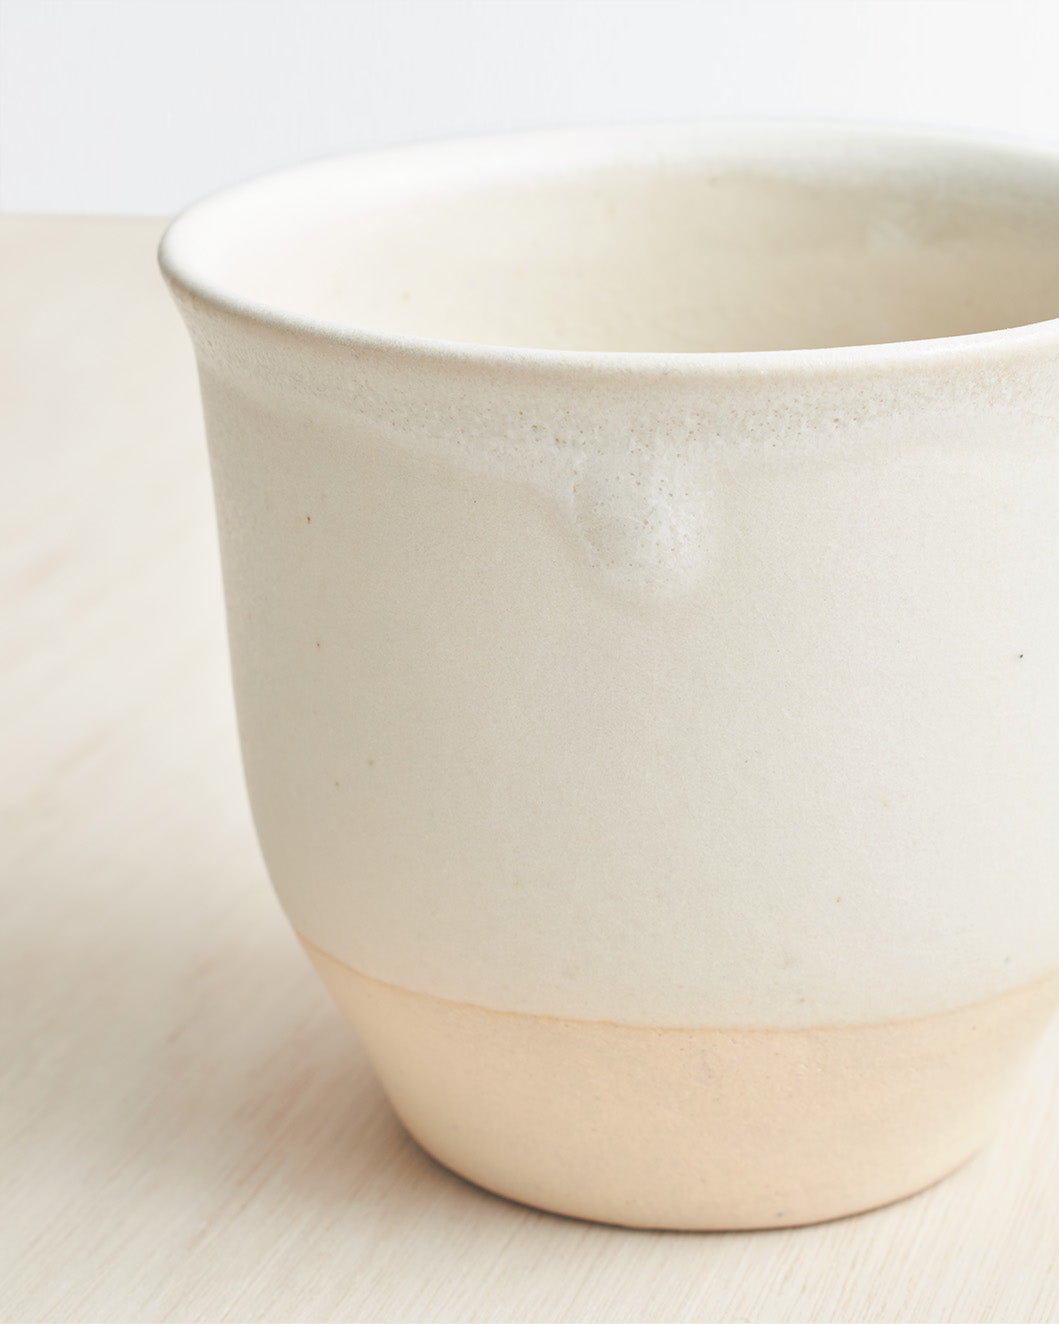 Handleless Stoneware Cup in White Glaze